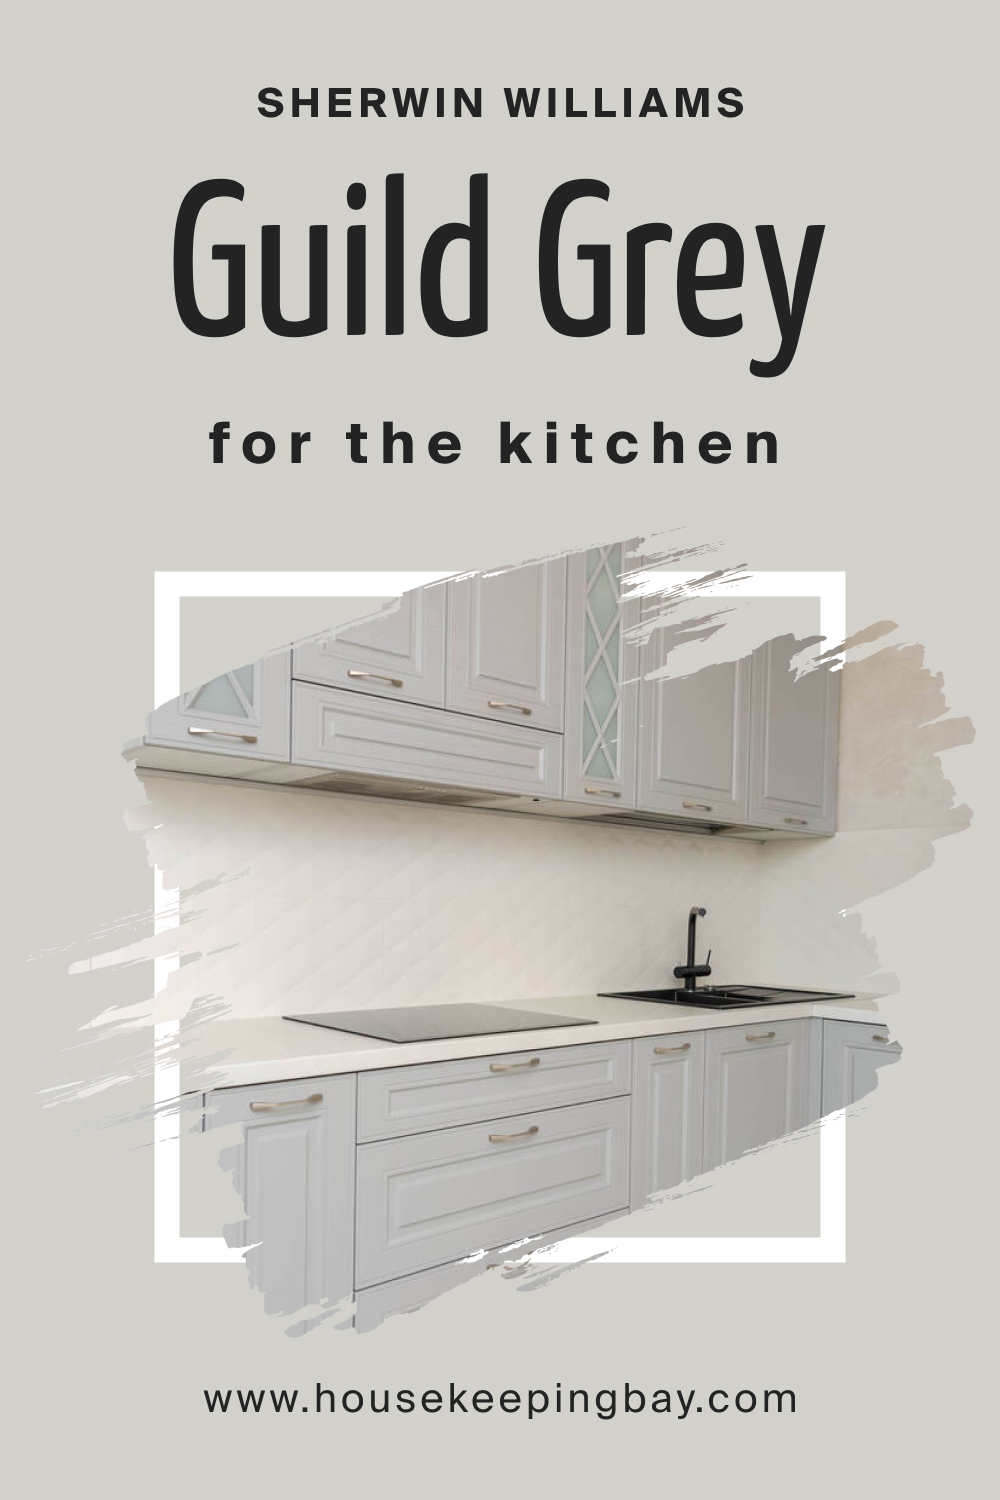 Sherwin Williams. SW 9561 Guild Grey For the Kitchens